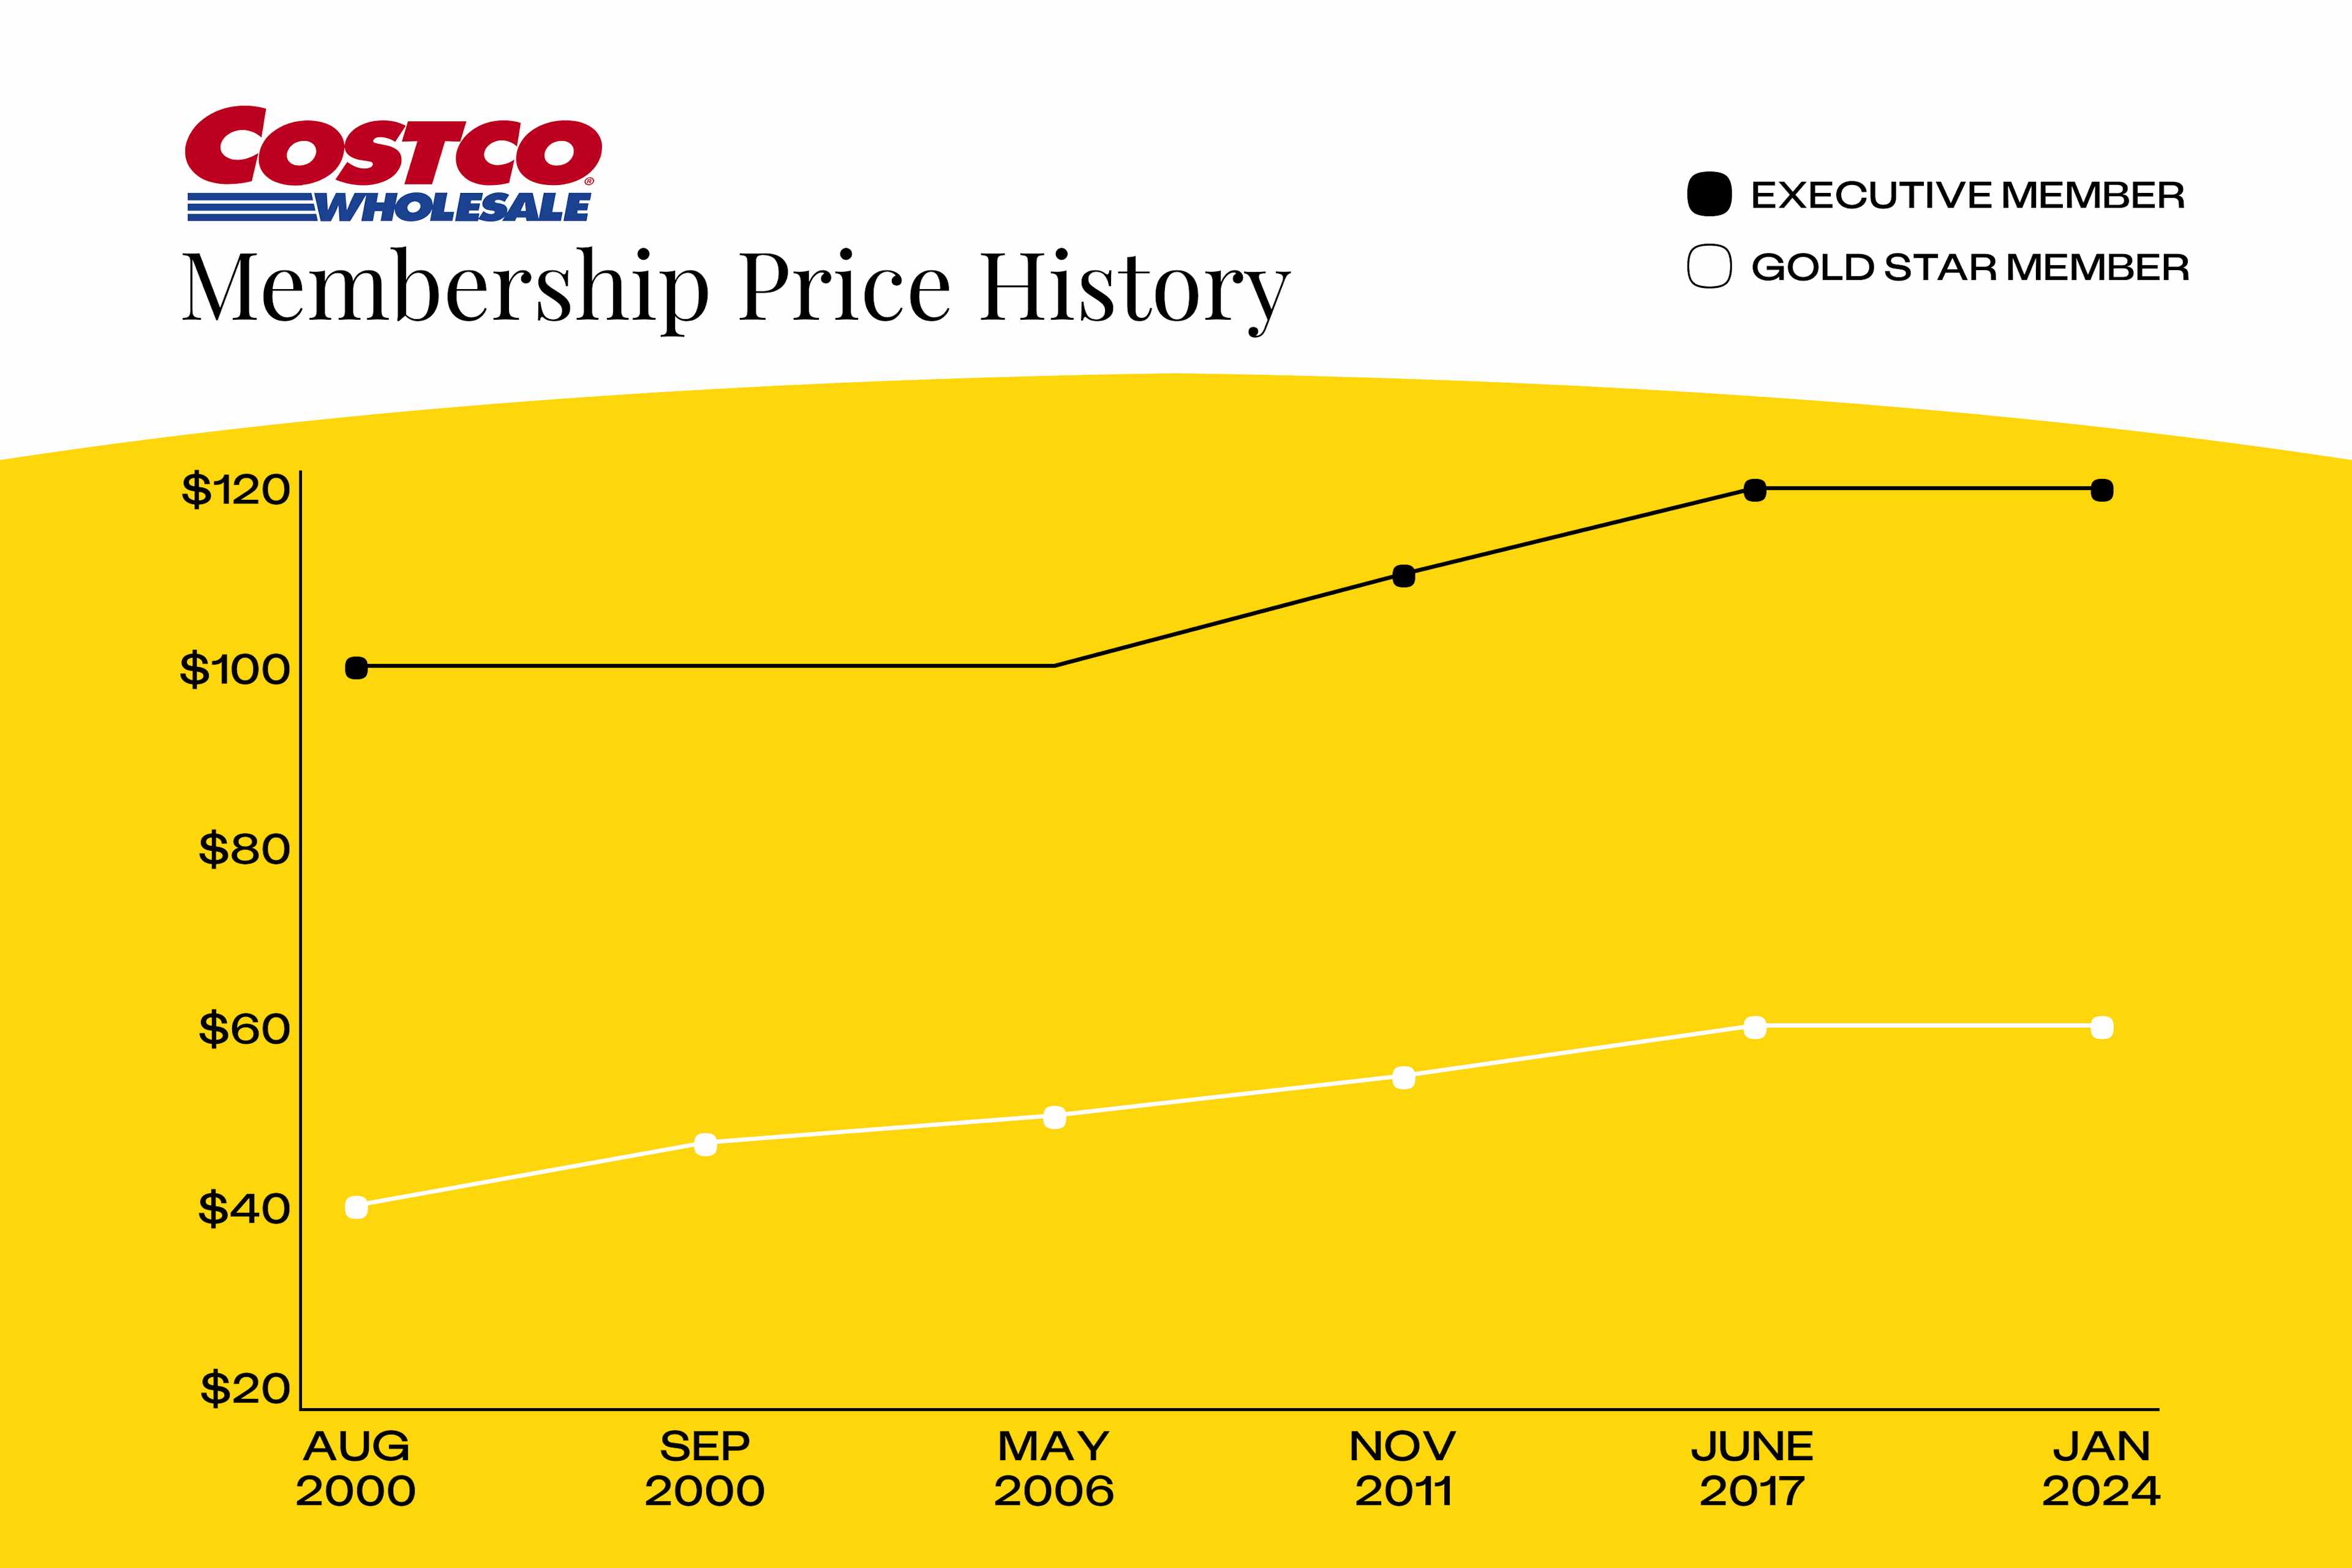 Timeline of past Costco membership fee increases in 2000, 2006, 2011, and 2017.